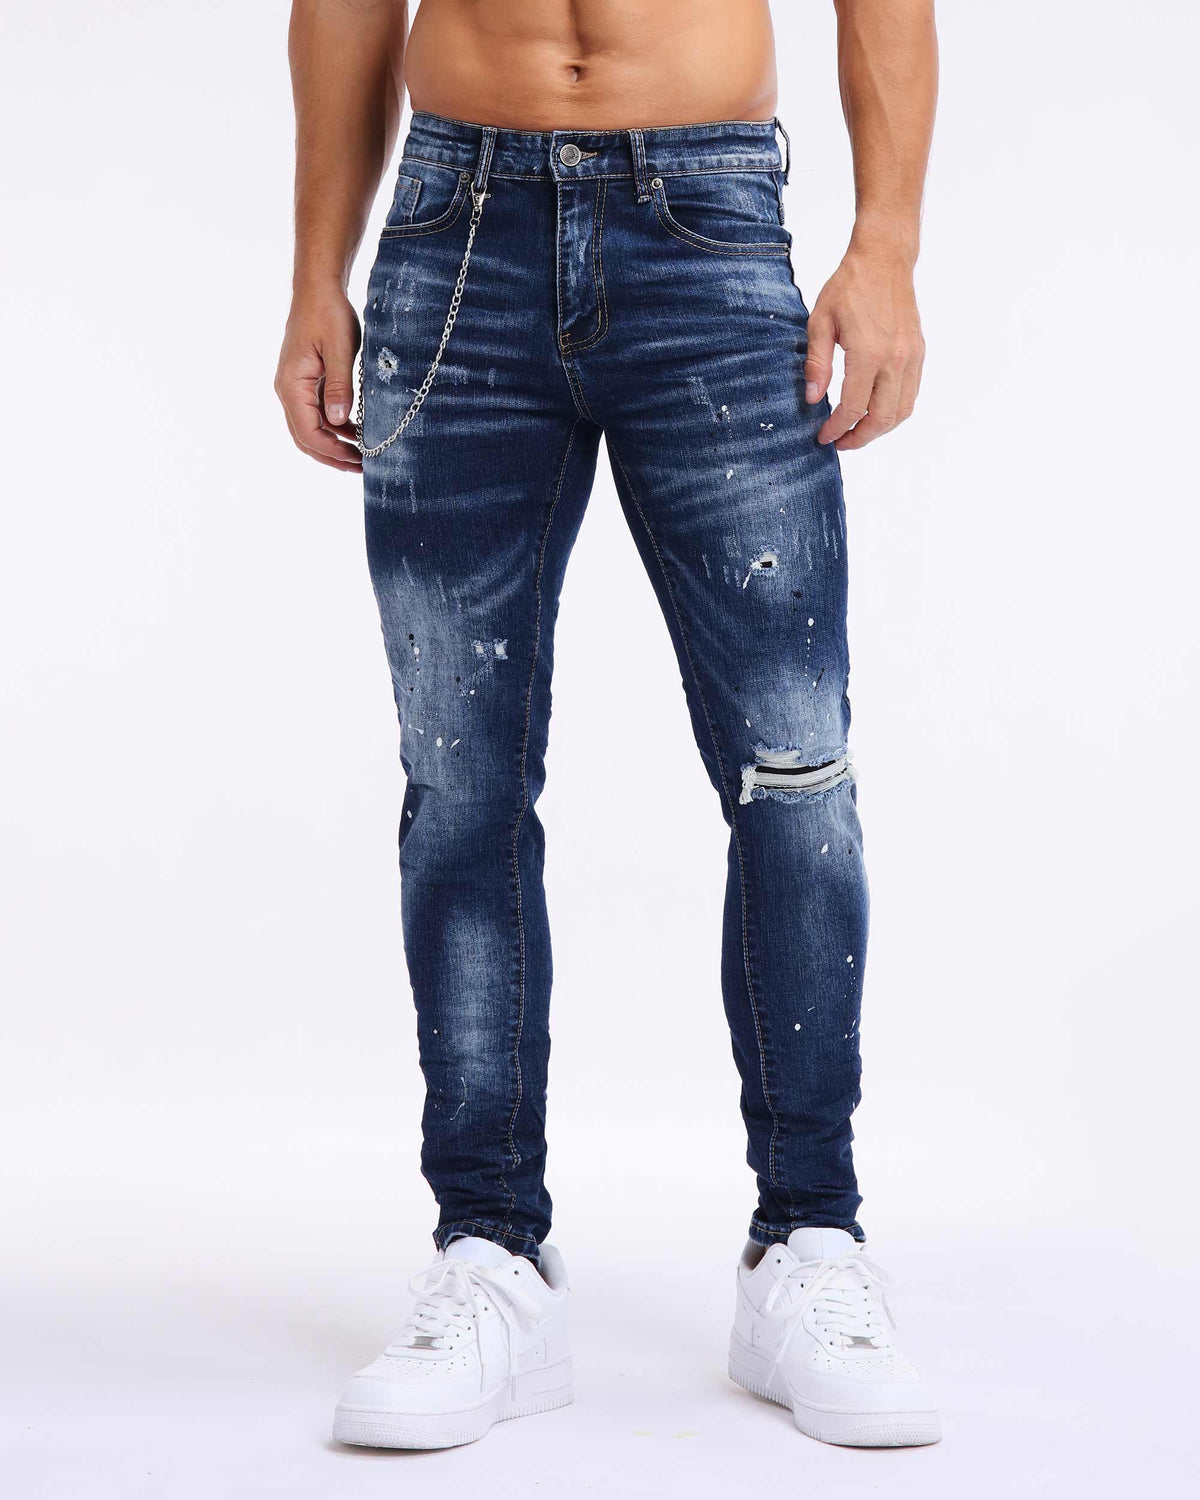 LOGEQI Spray Paint Slim Fit Blue Jeans in Deep Wash